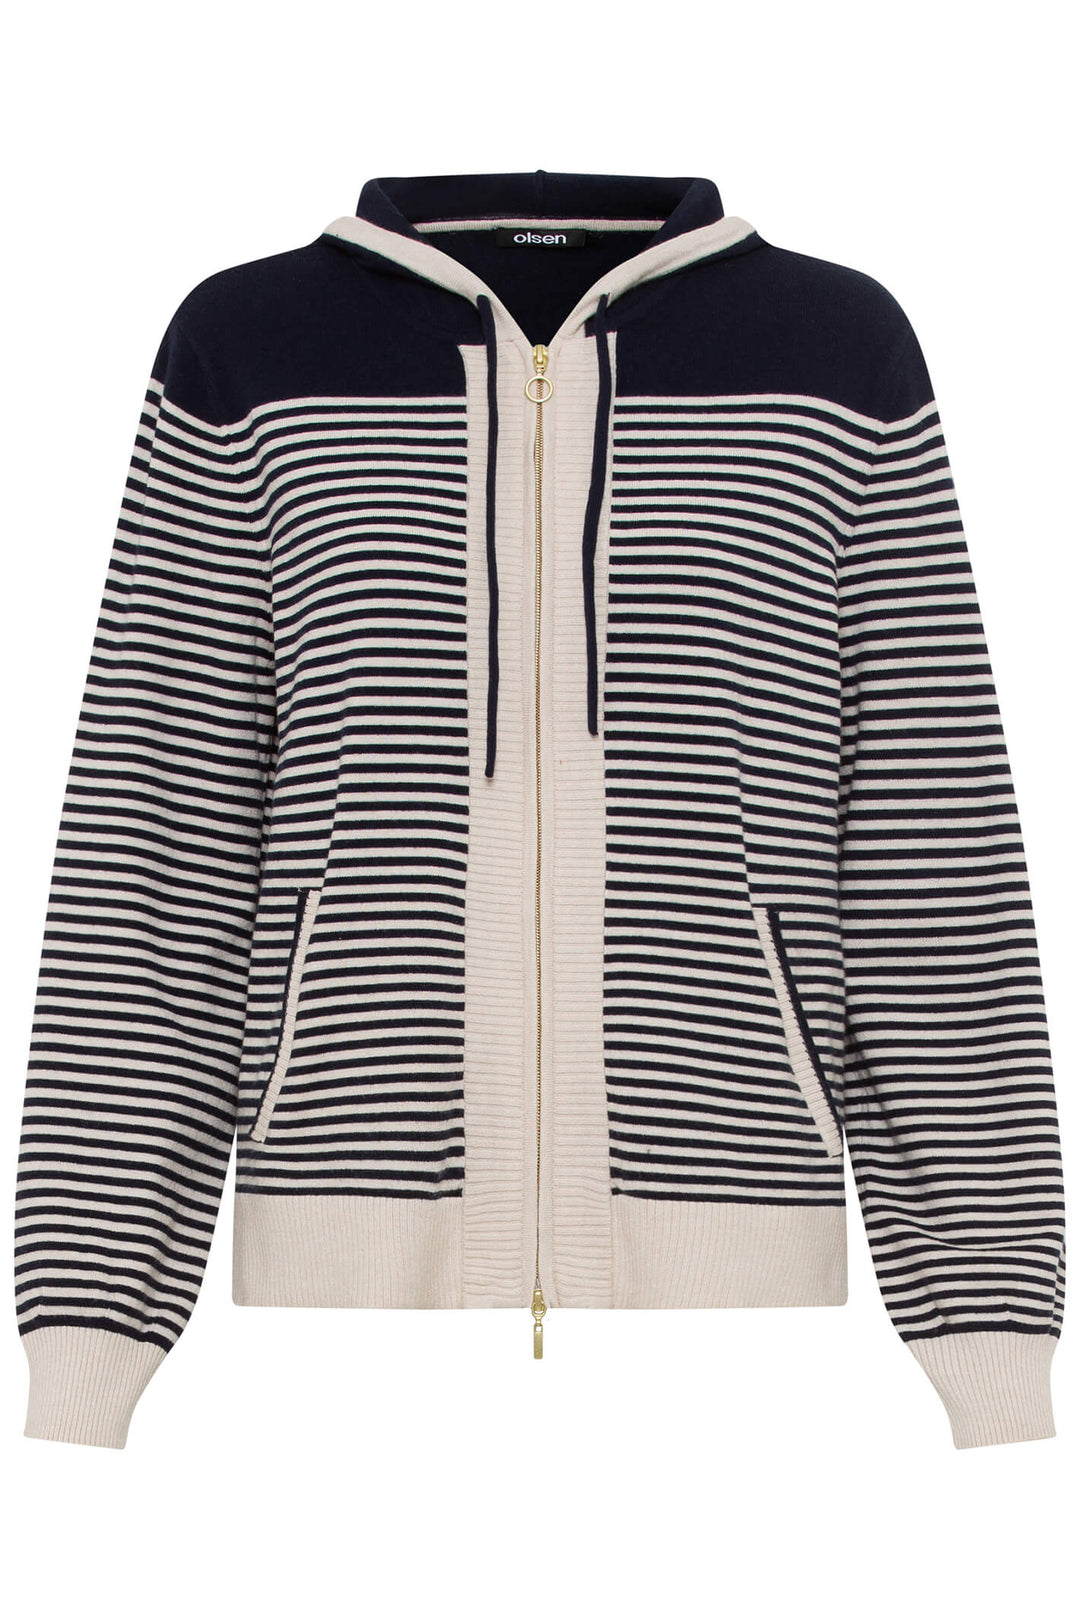 Olsen 11004091 Navy Ink Blue Sports Luxe Stripe Hooded Cardigan - Experience Boutique